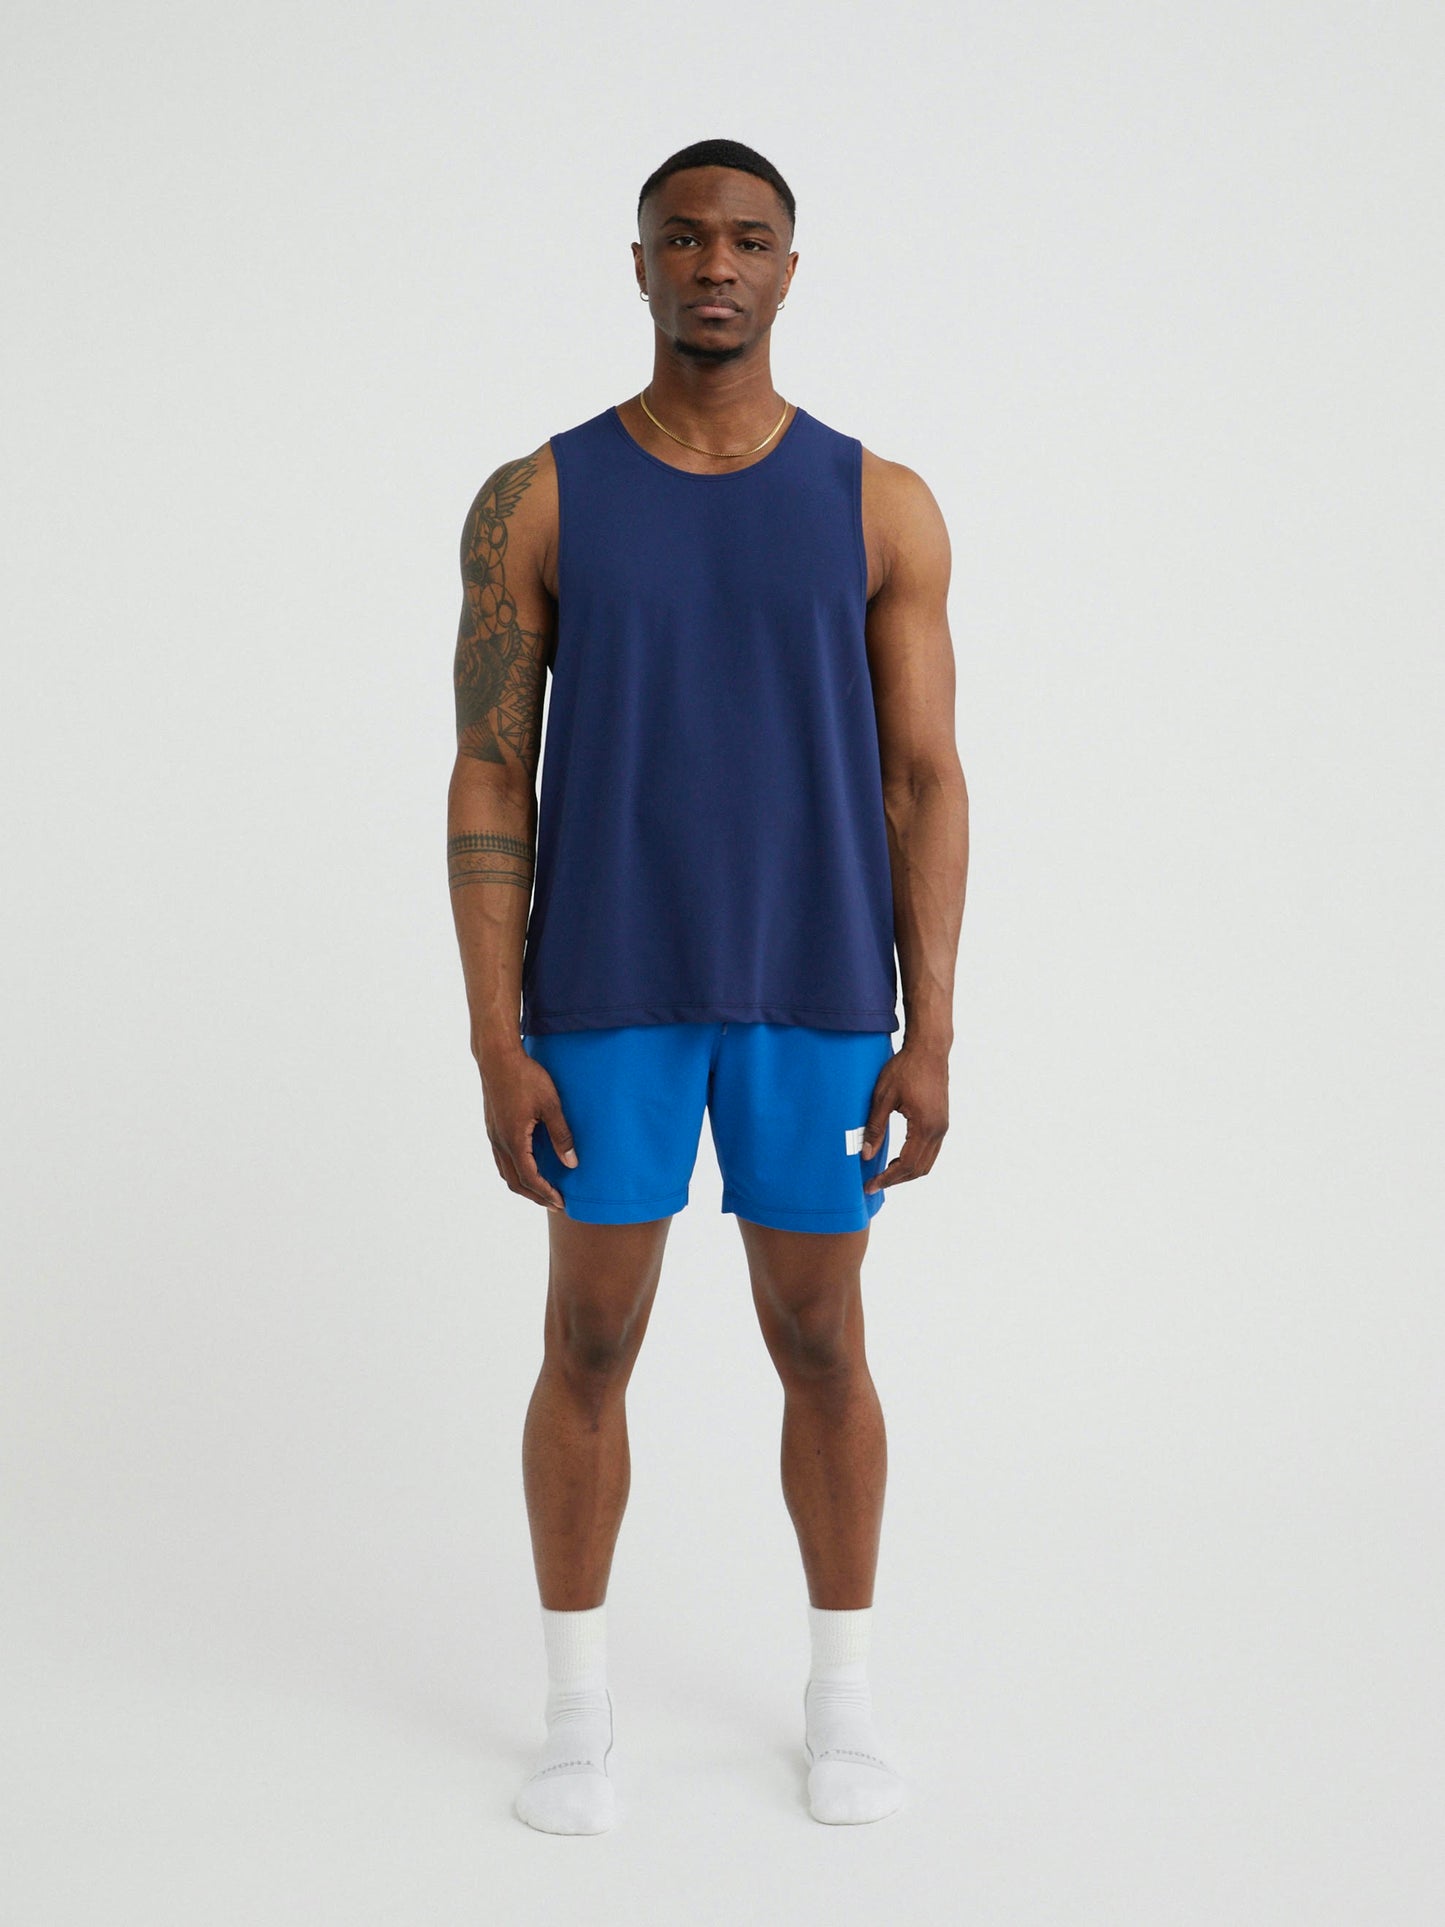 Mens Premium Athletic Tank Made in NYC - Navy